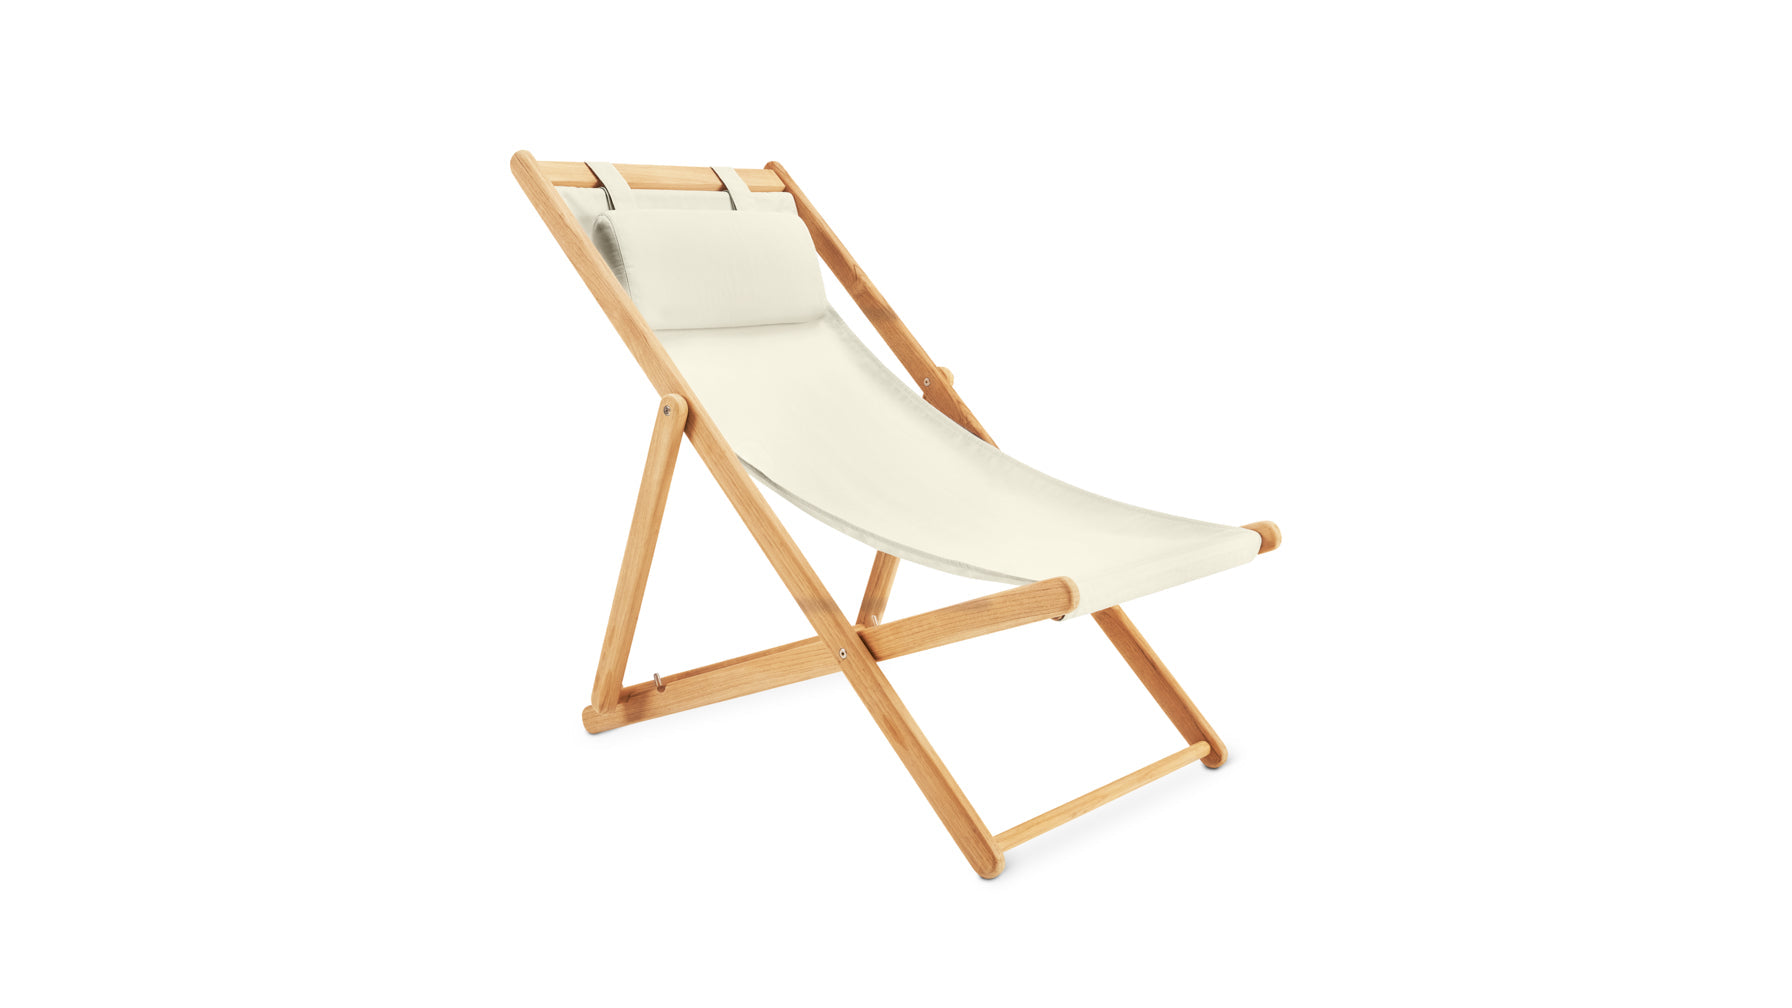 Settle In Outdoor Deck Chair, Canvas - Image 2